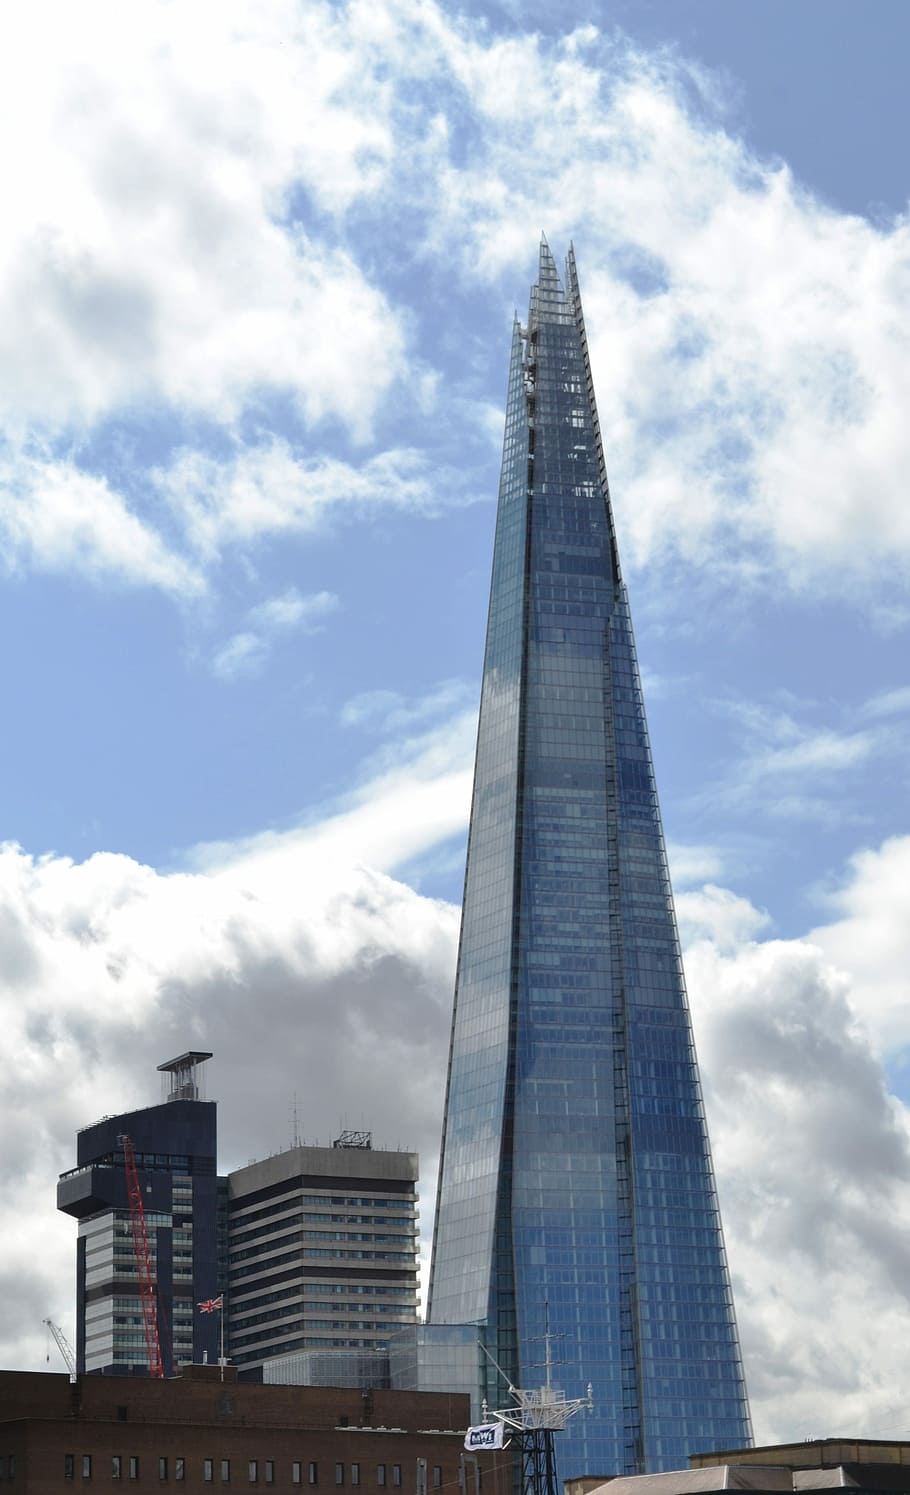 Shard, London, Architecture, Building, architecture, building, skyscraper, tall - high, tower, built structure, sky